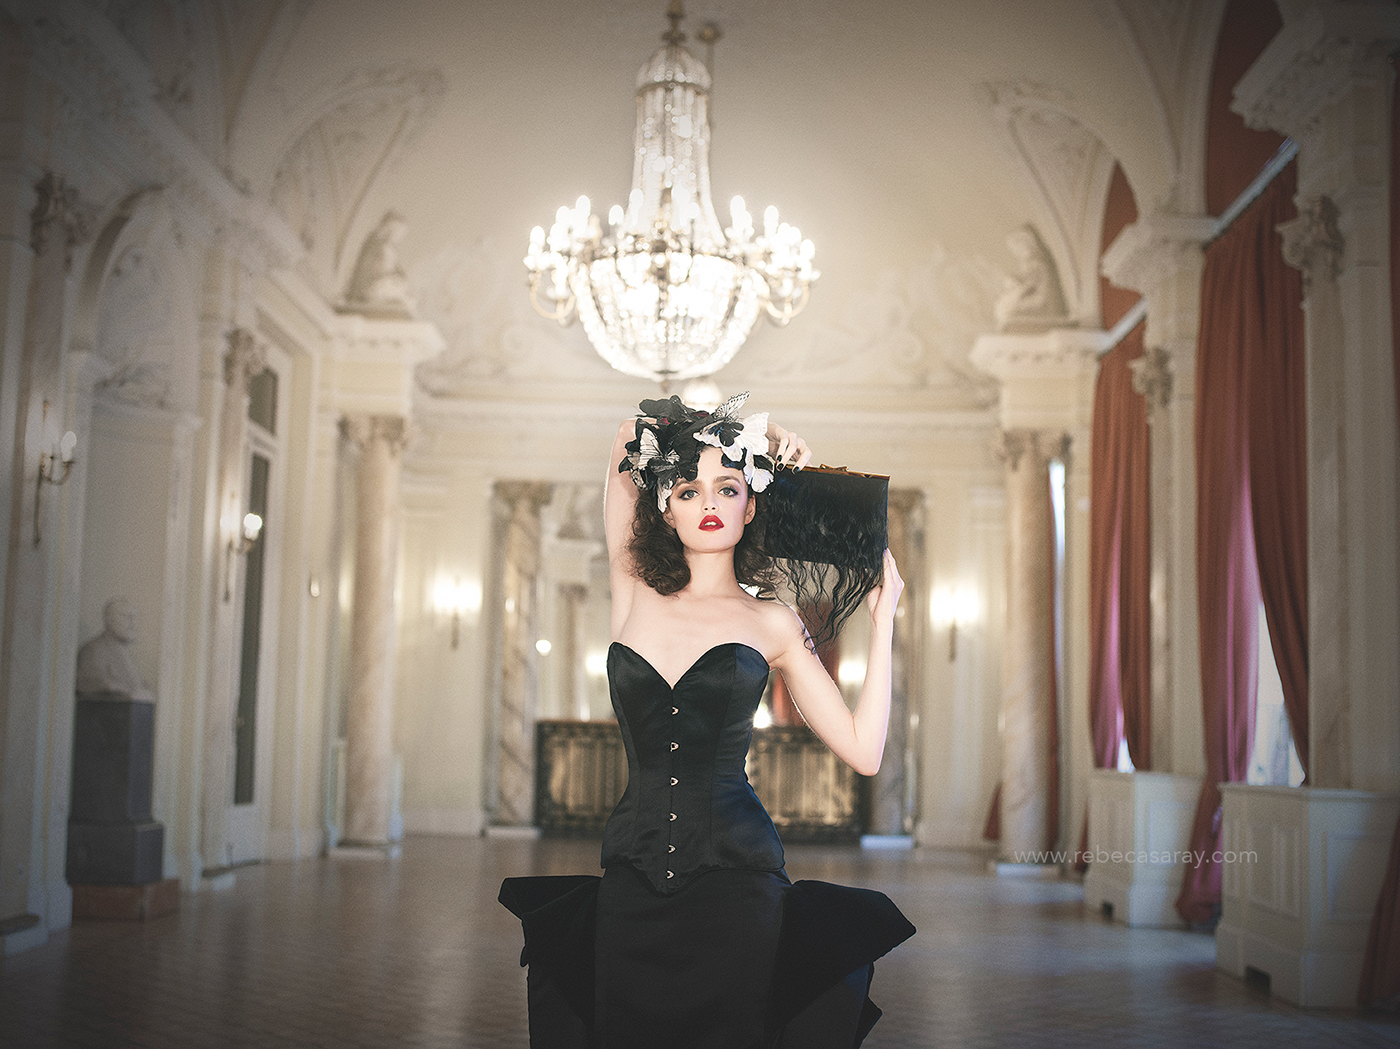 bag make-up beauty vintage fantasy girl Haute couture romantic decadent White rebeca saray bowens Pentax